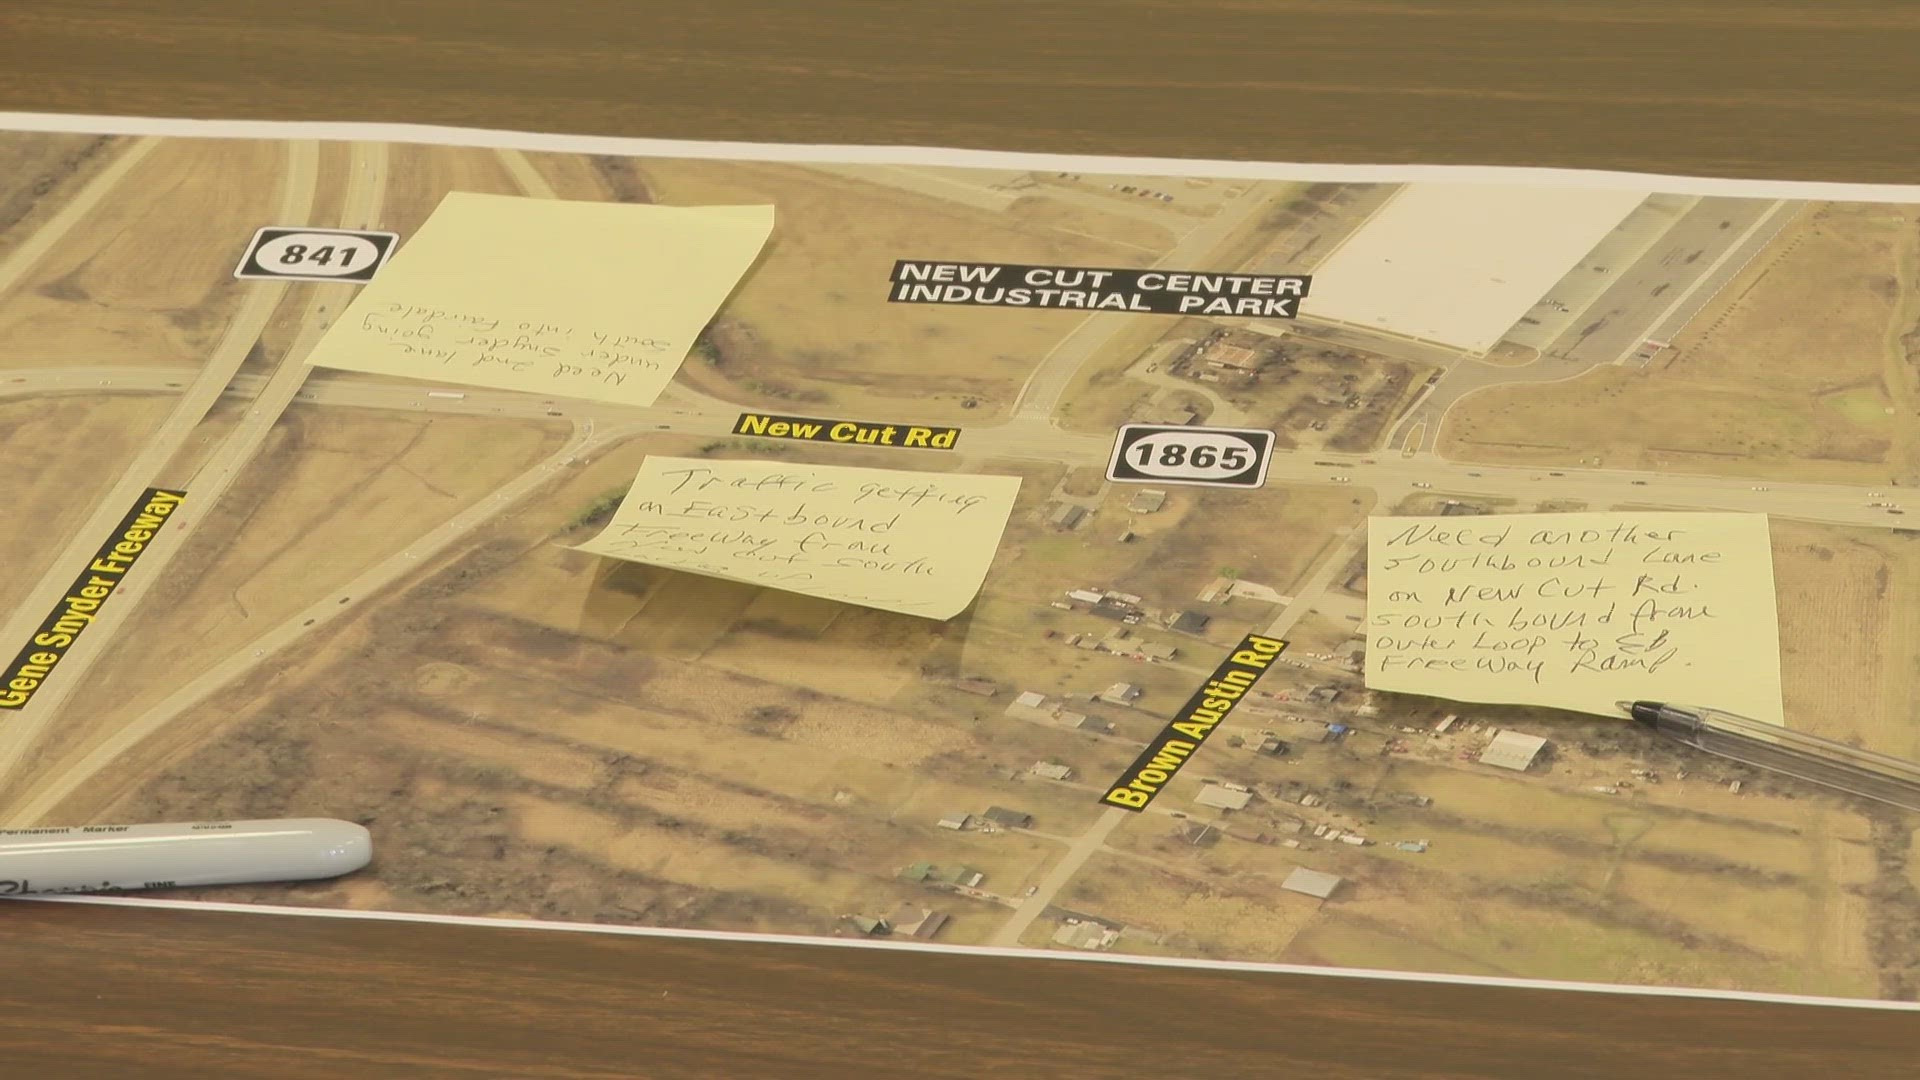 The open house was about getting feedback on what improvements could be made to the area.